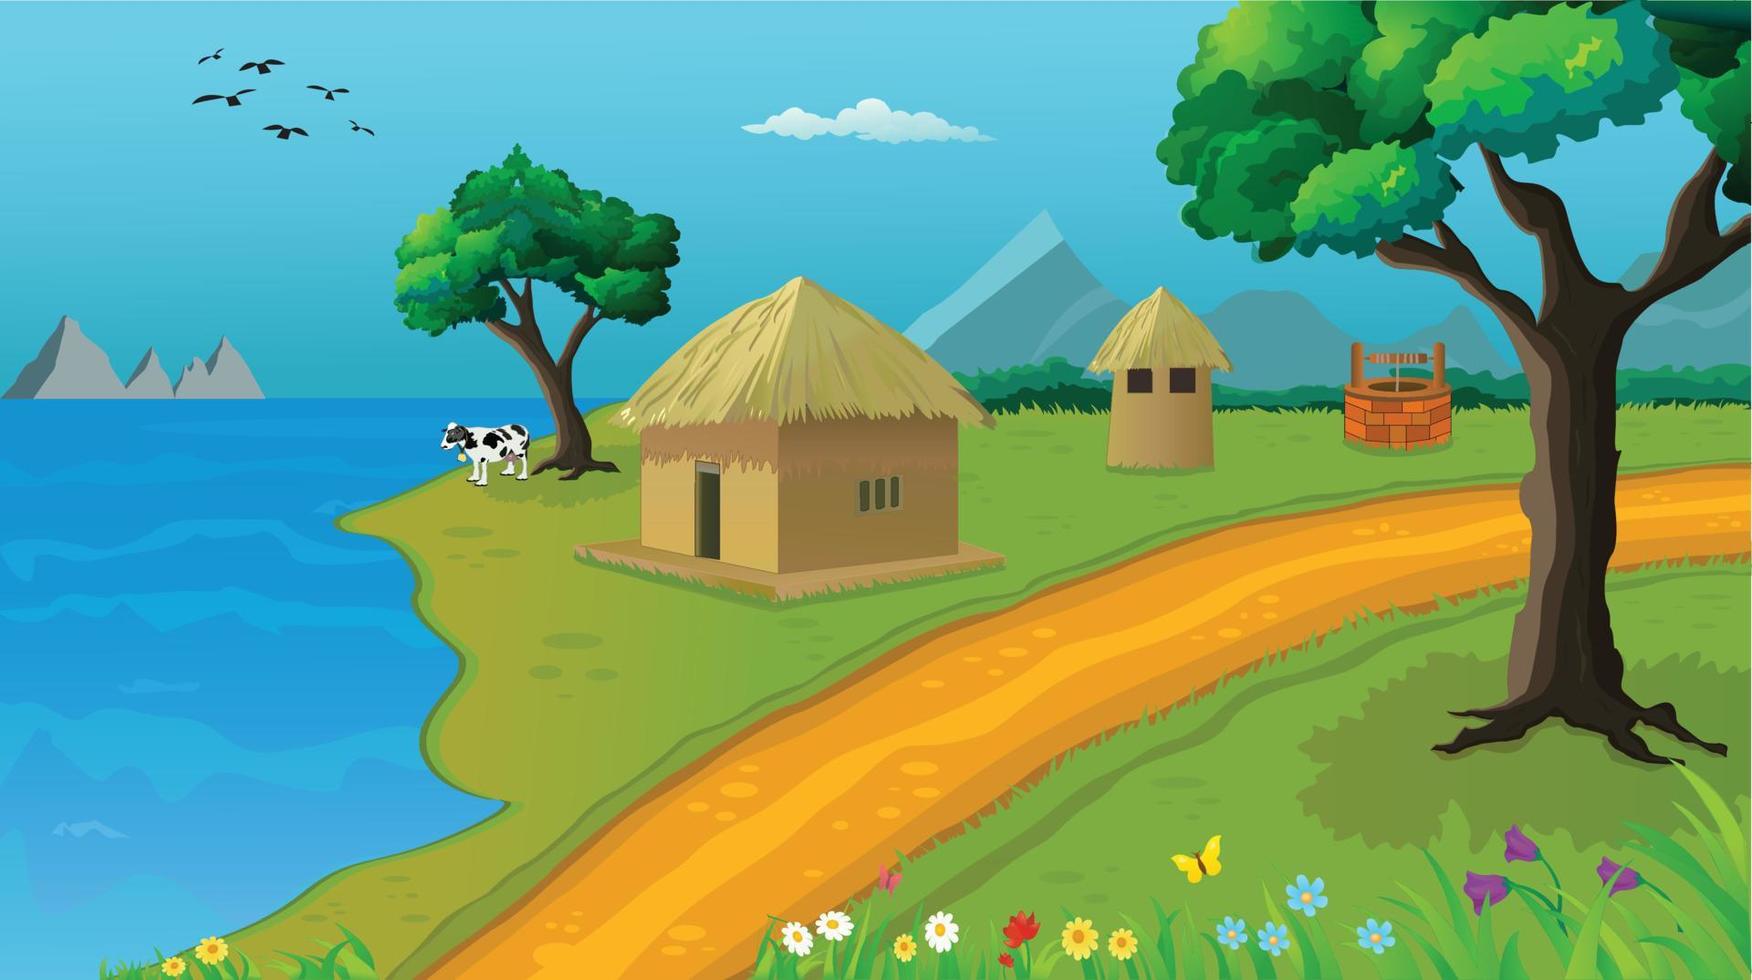 Village cartoon background illustration with sun, cottage, lake, trees, and narrow road. vector